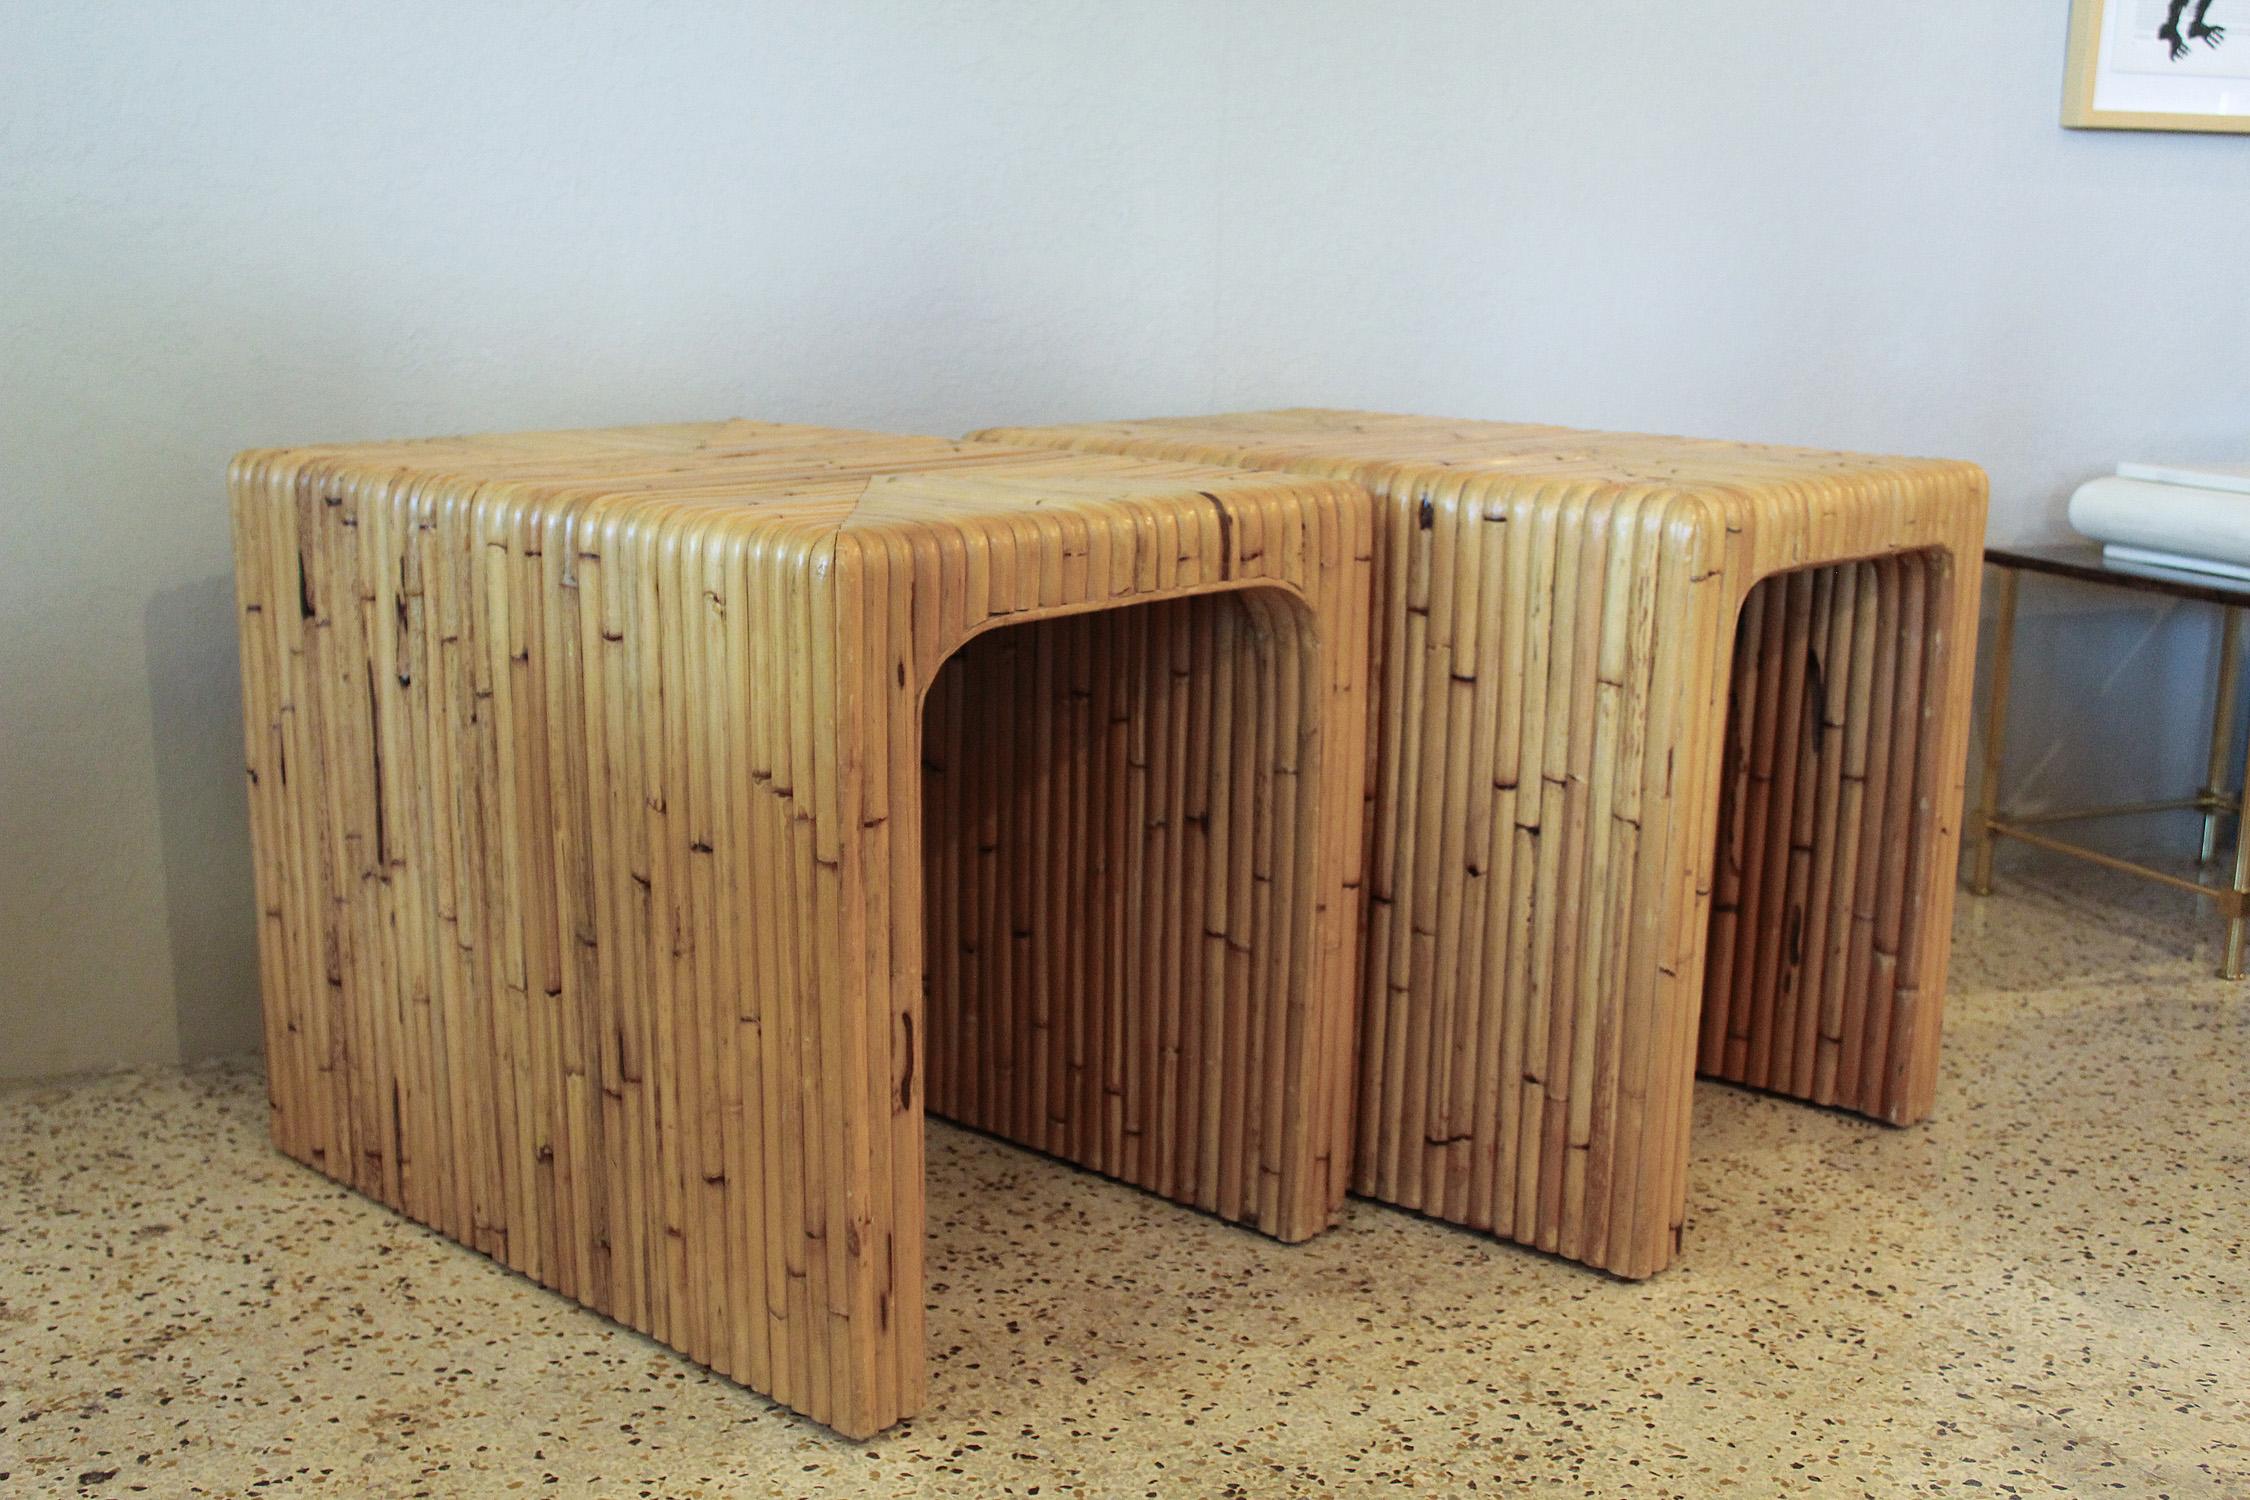 Lightly restored, pair of 1970s split bamboo end tables are the beach-perfect blend of modern and organic.